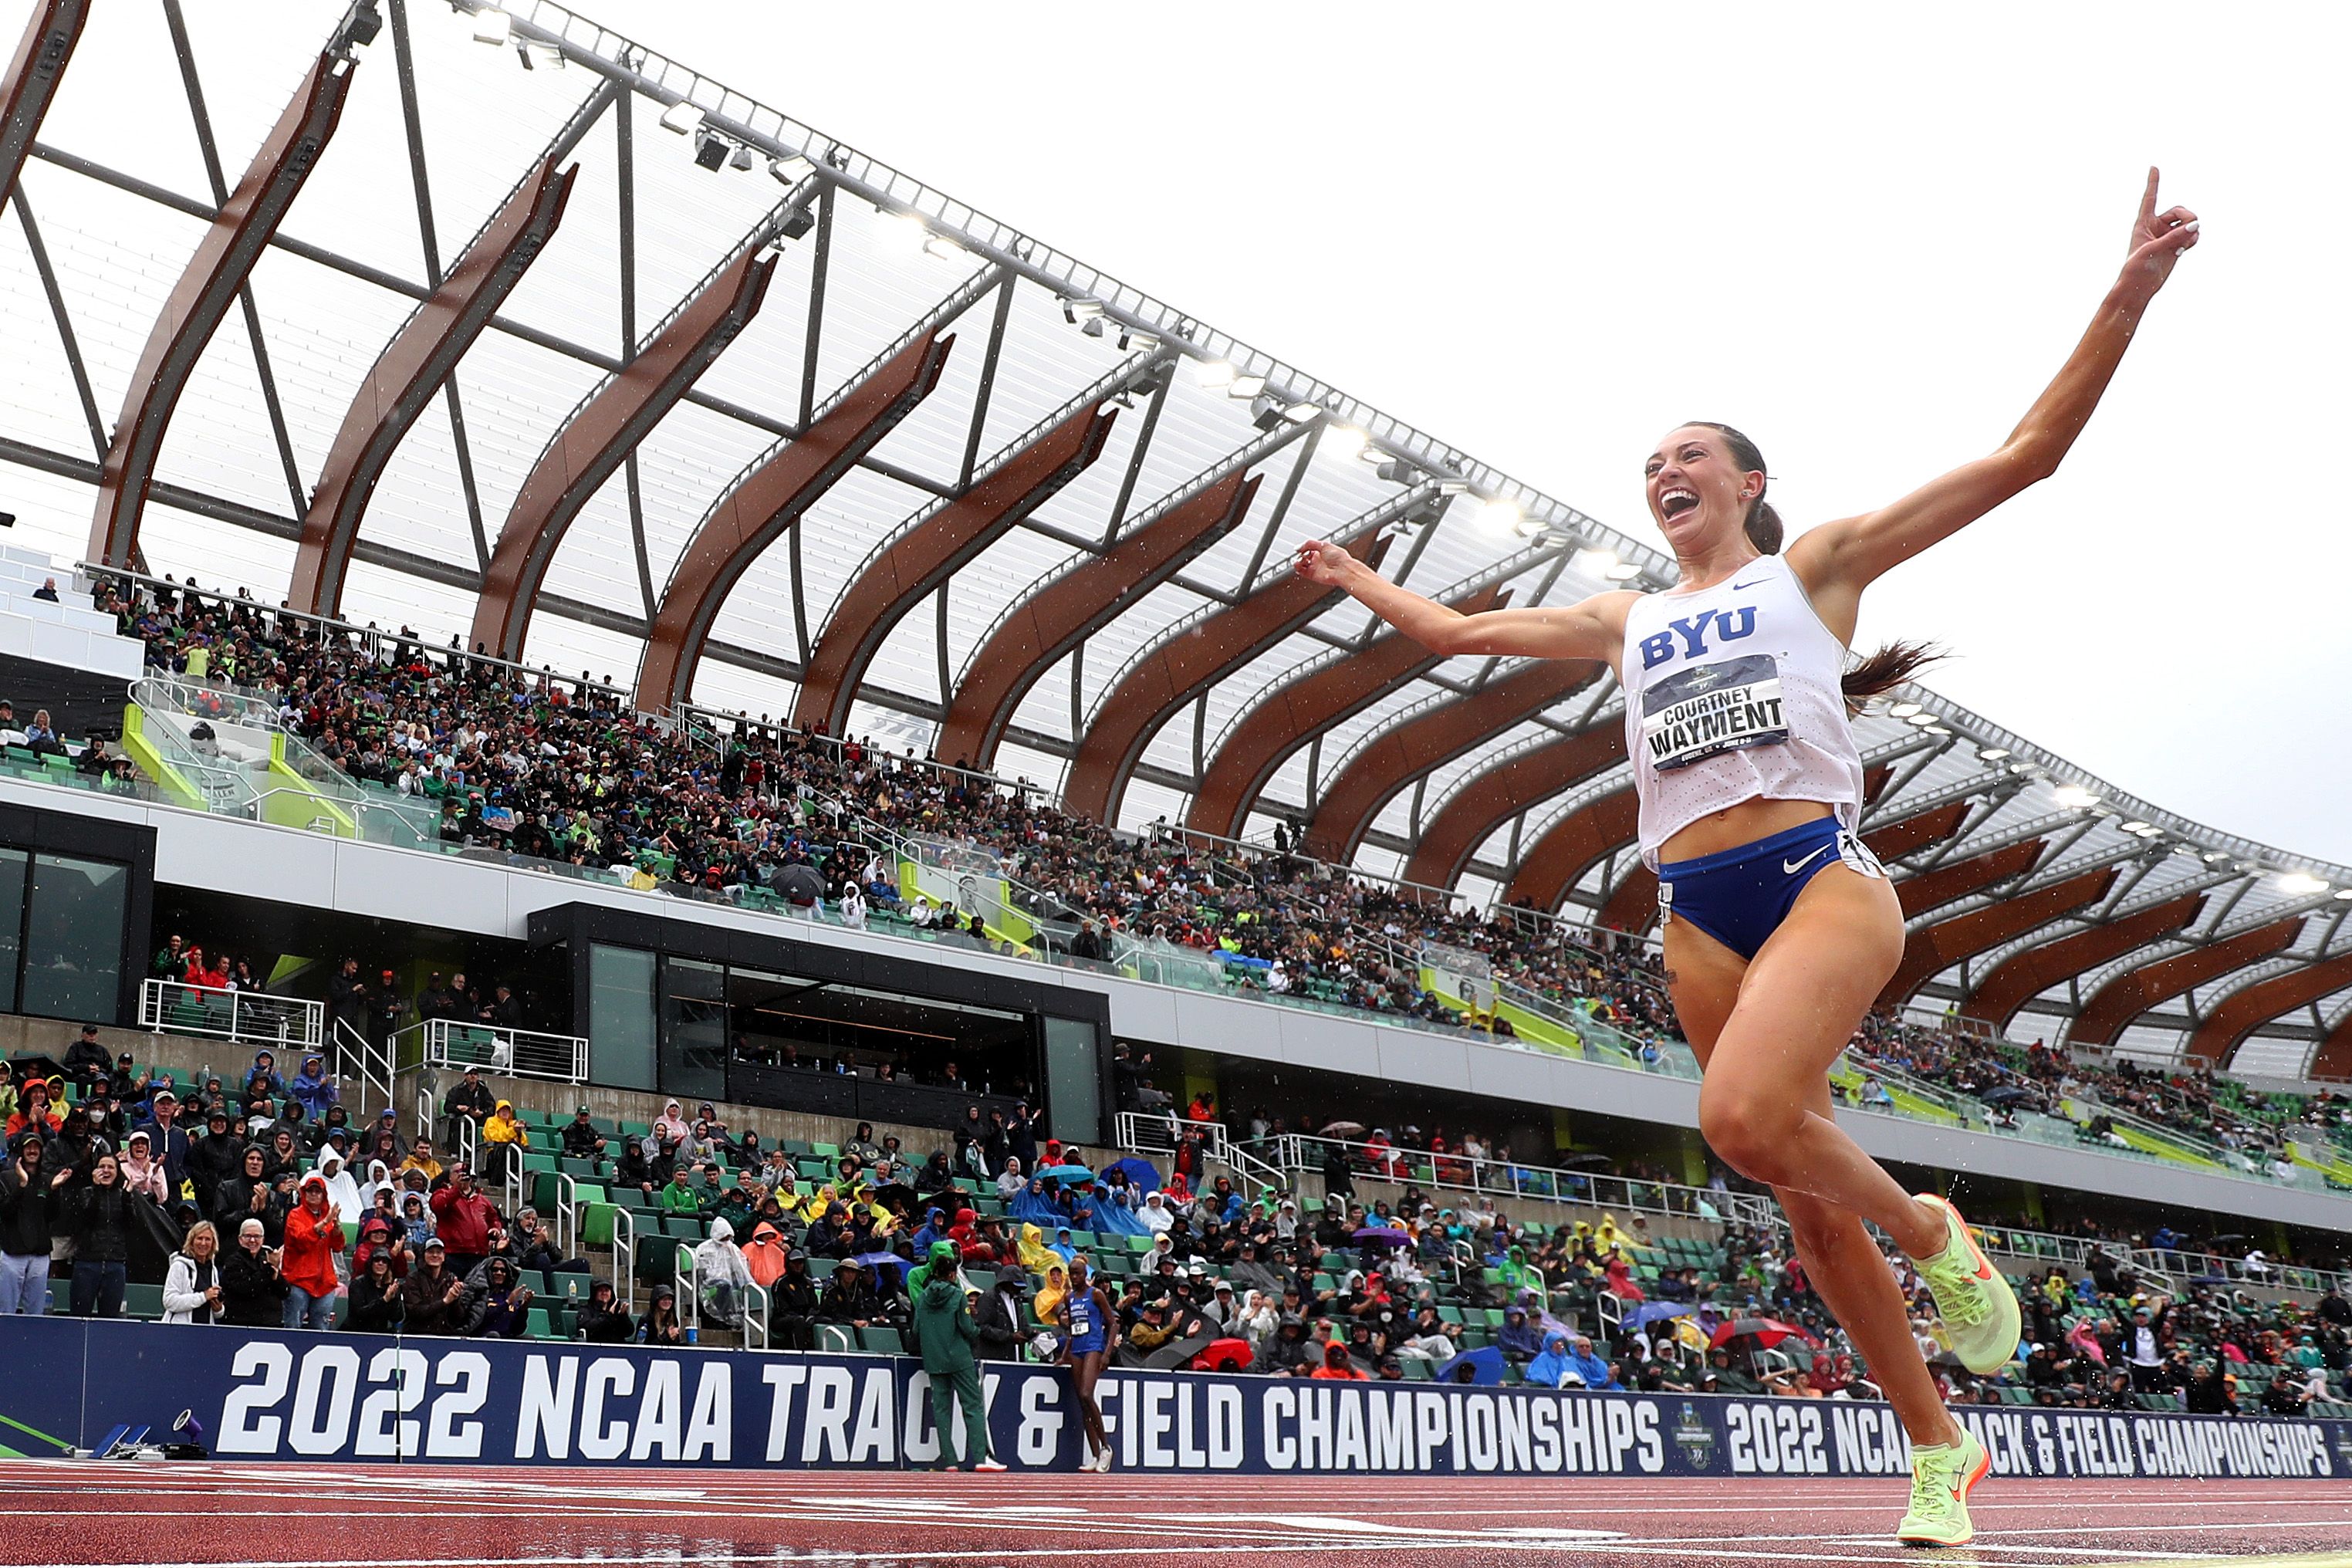 Courtney Wayment wins the NCAA 3000m steeplechase title in a collegiate record